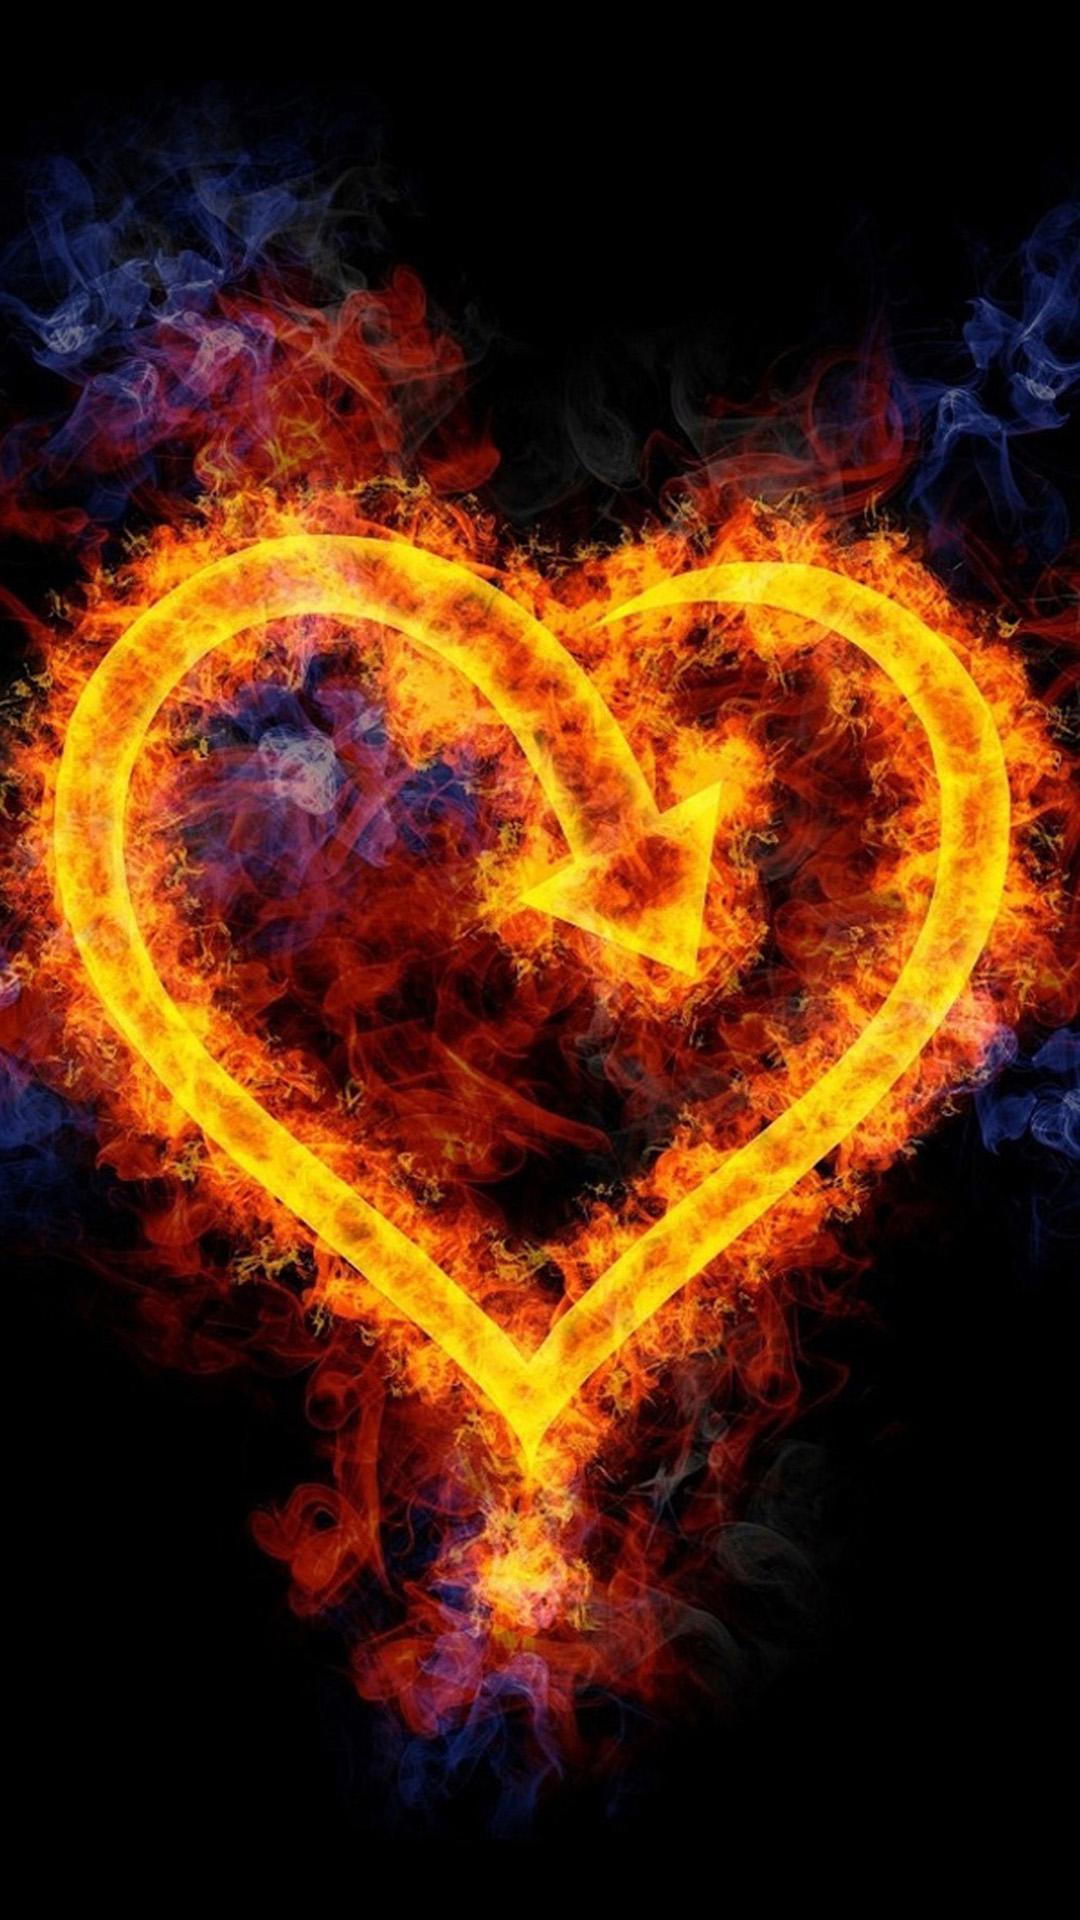 Flame of love Htc One M8 wallpaper. Htc One M8 Wallpaper